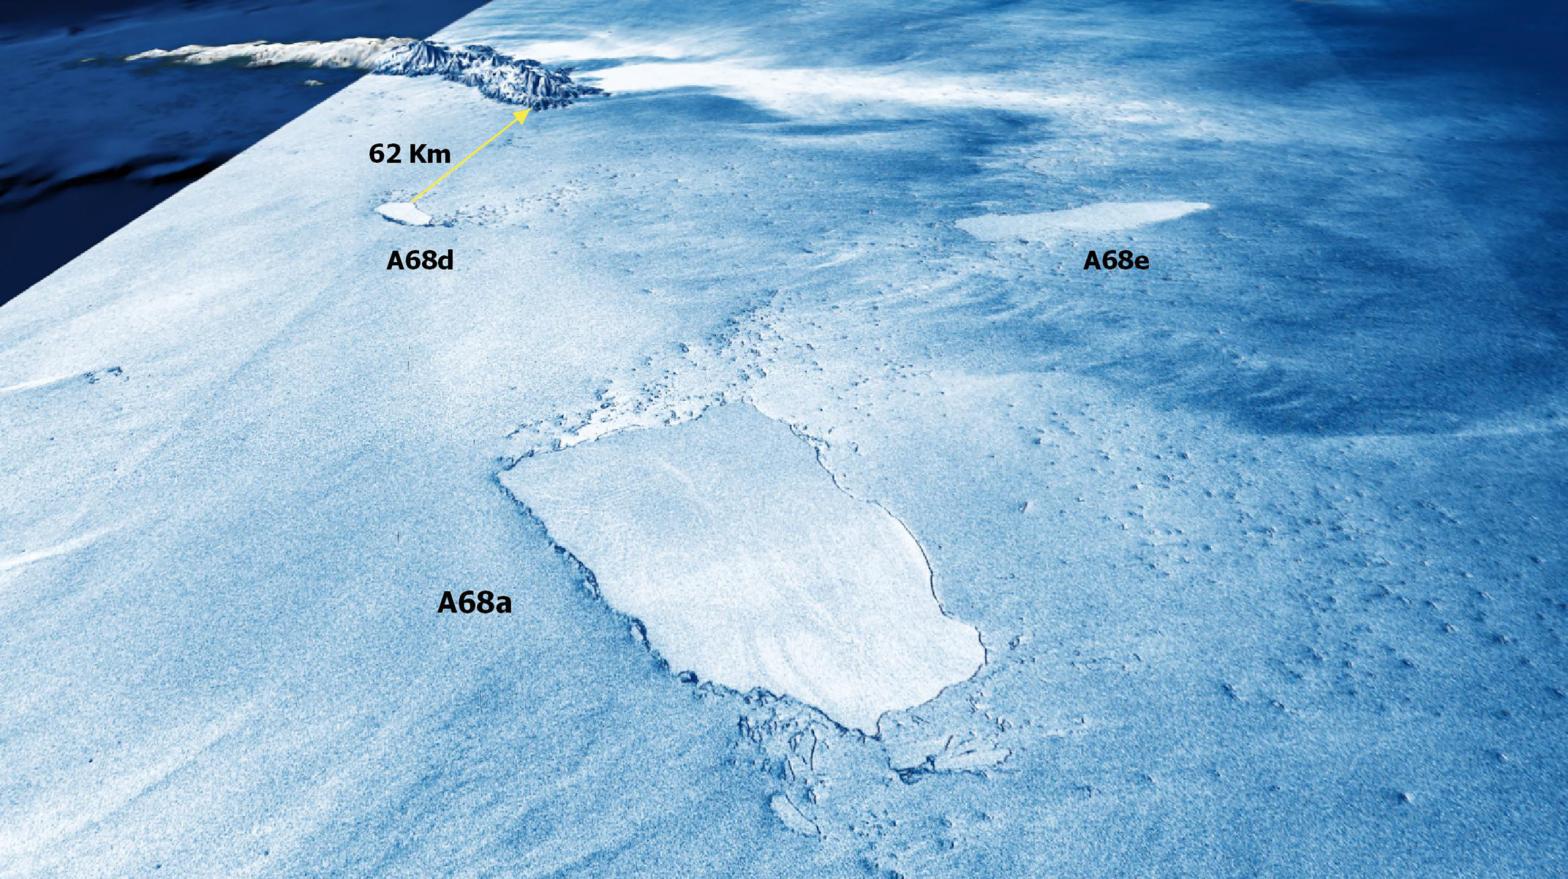 A 3D synthetic-aperture radar (SAR) view of iceberg A68a and its offspring on January 5, 2021, with South Georgia island in the background. (Image: Copernicus/Sentinel-1/Antonio Vecoli)